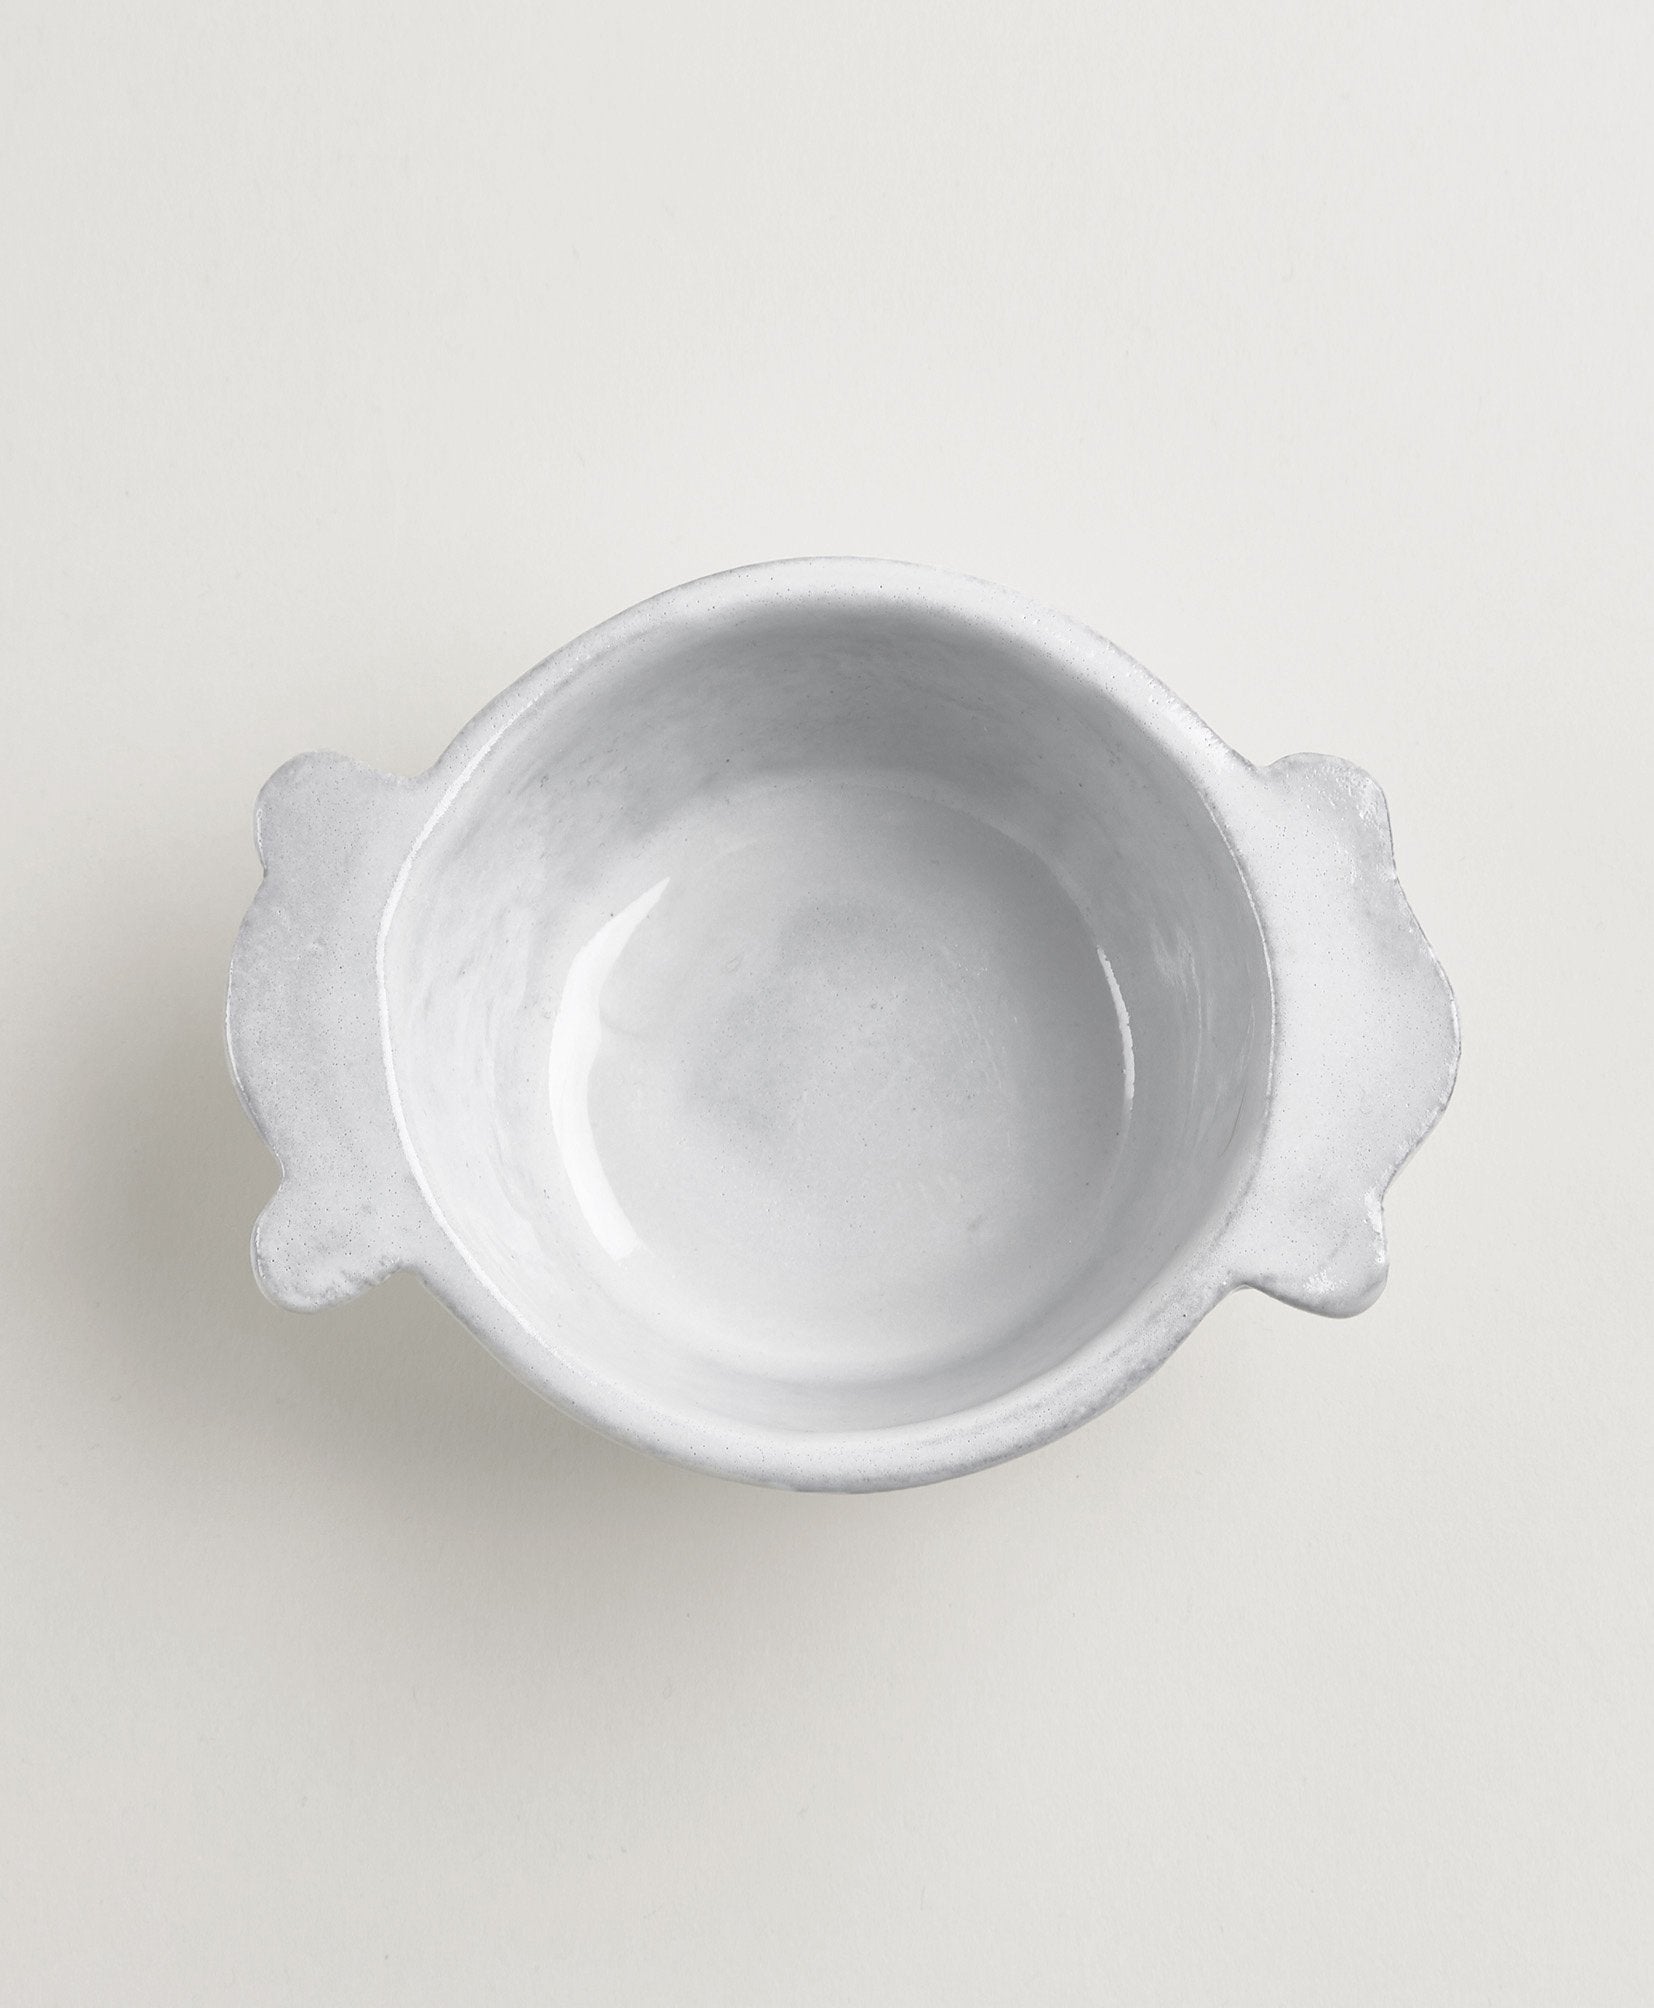   Bowl with Handles  